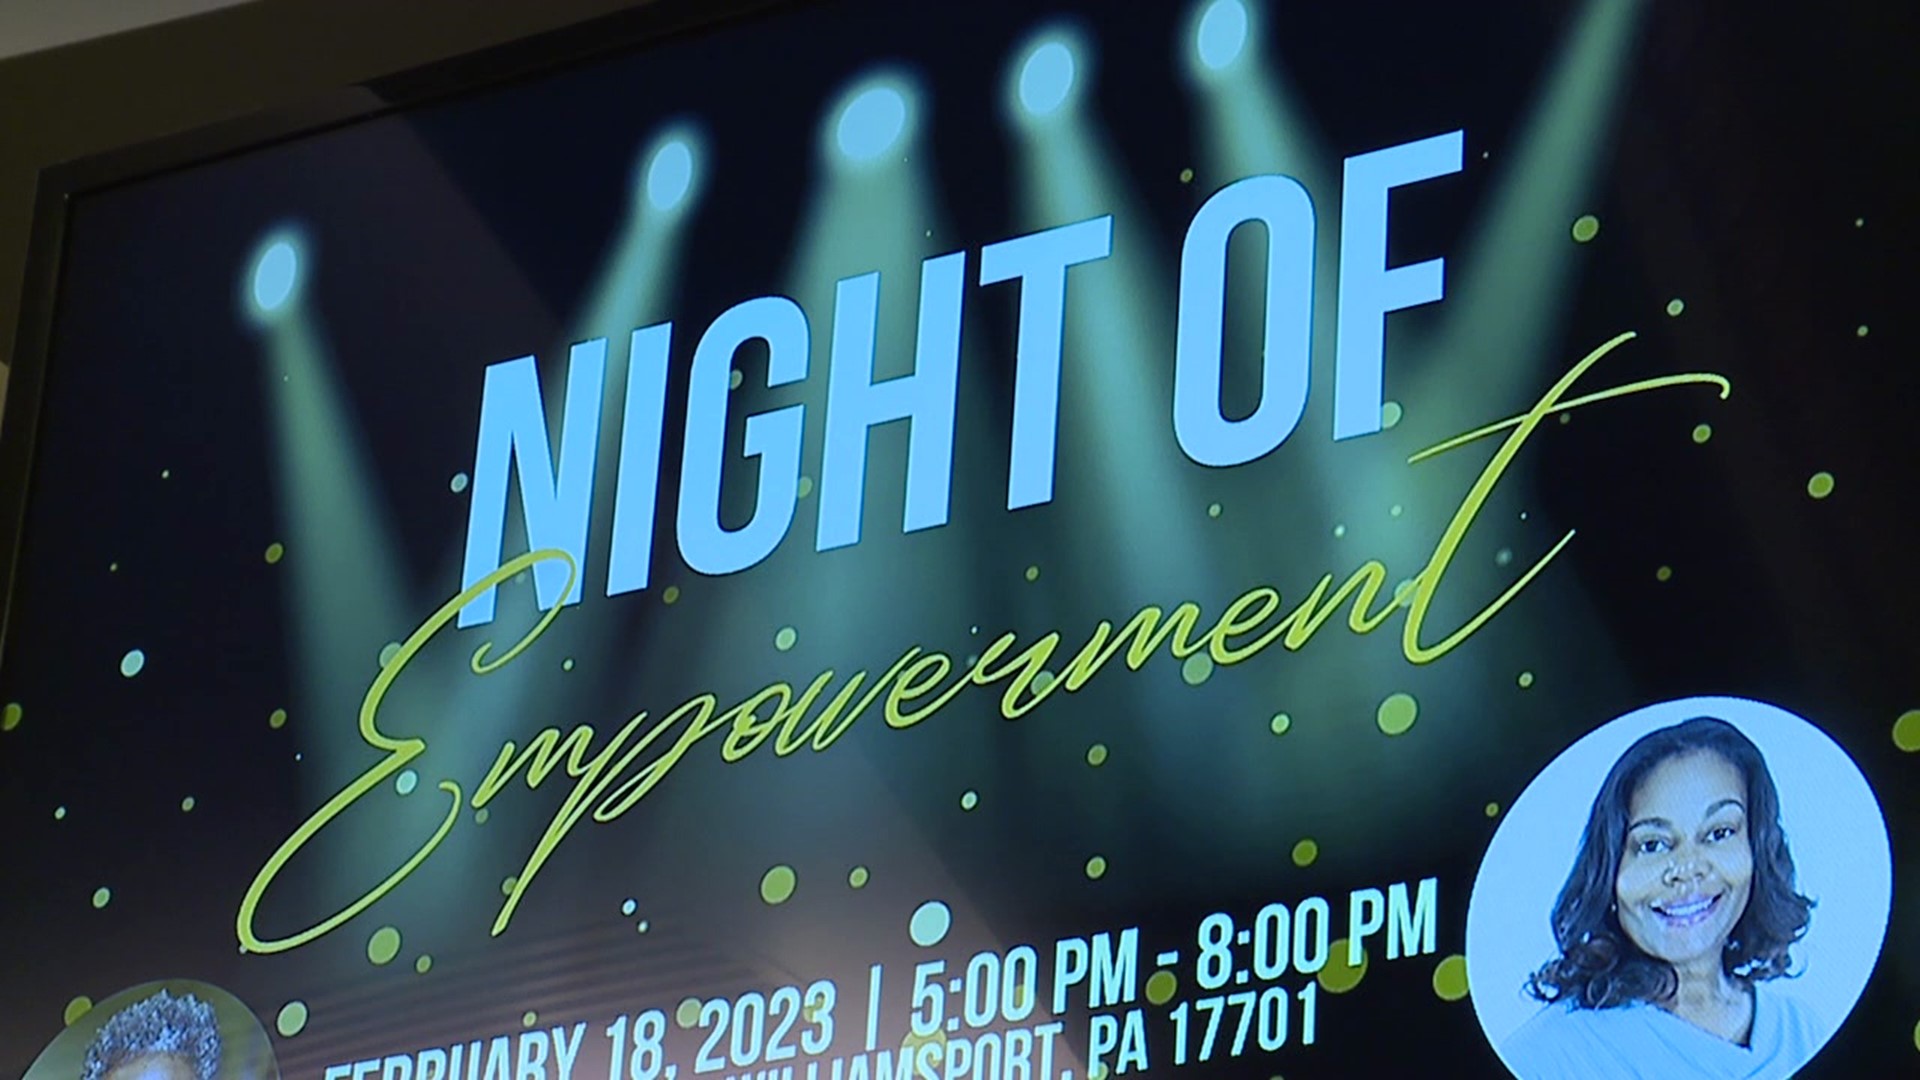 The city of Williamsport will be hosting the first Night of Empowerment to help students network and learn.